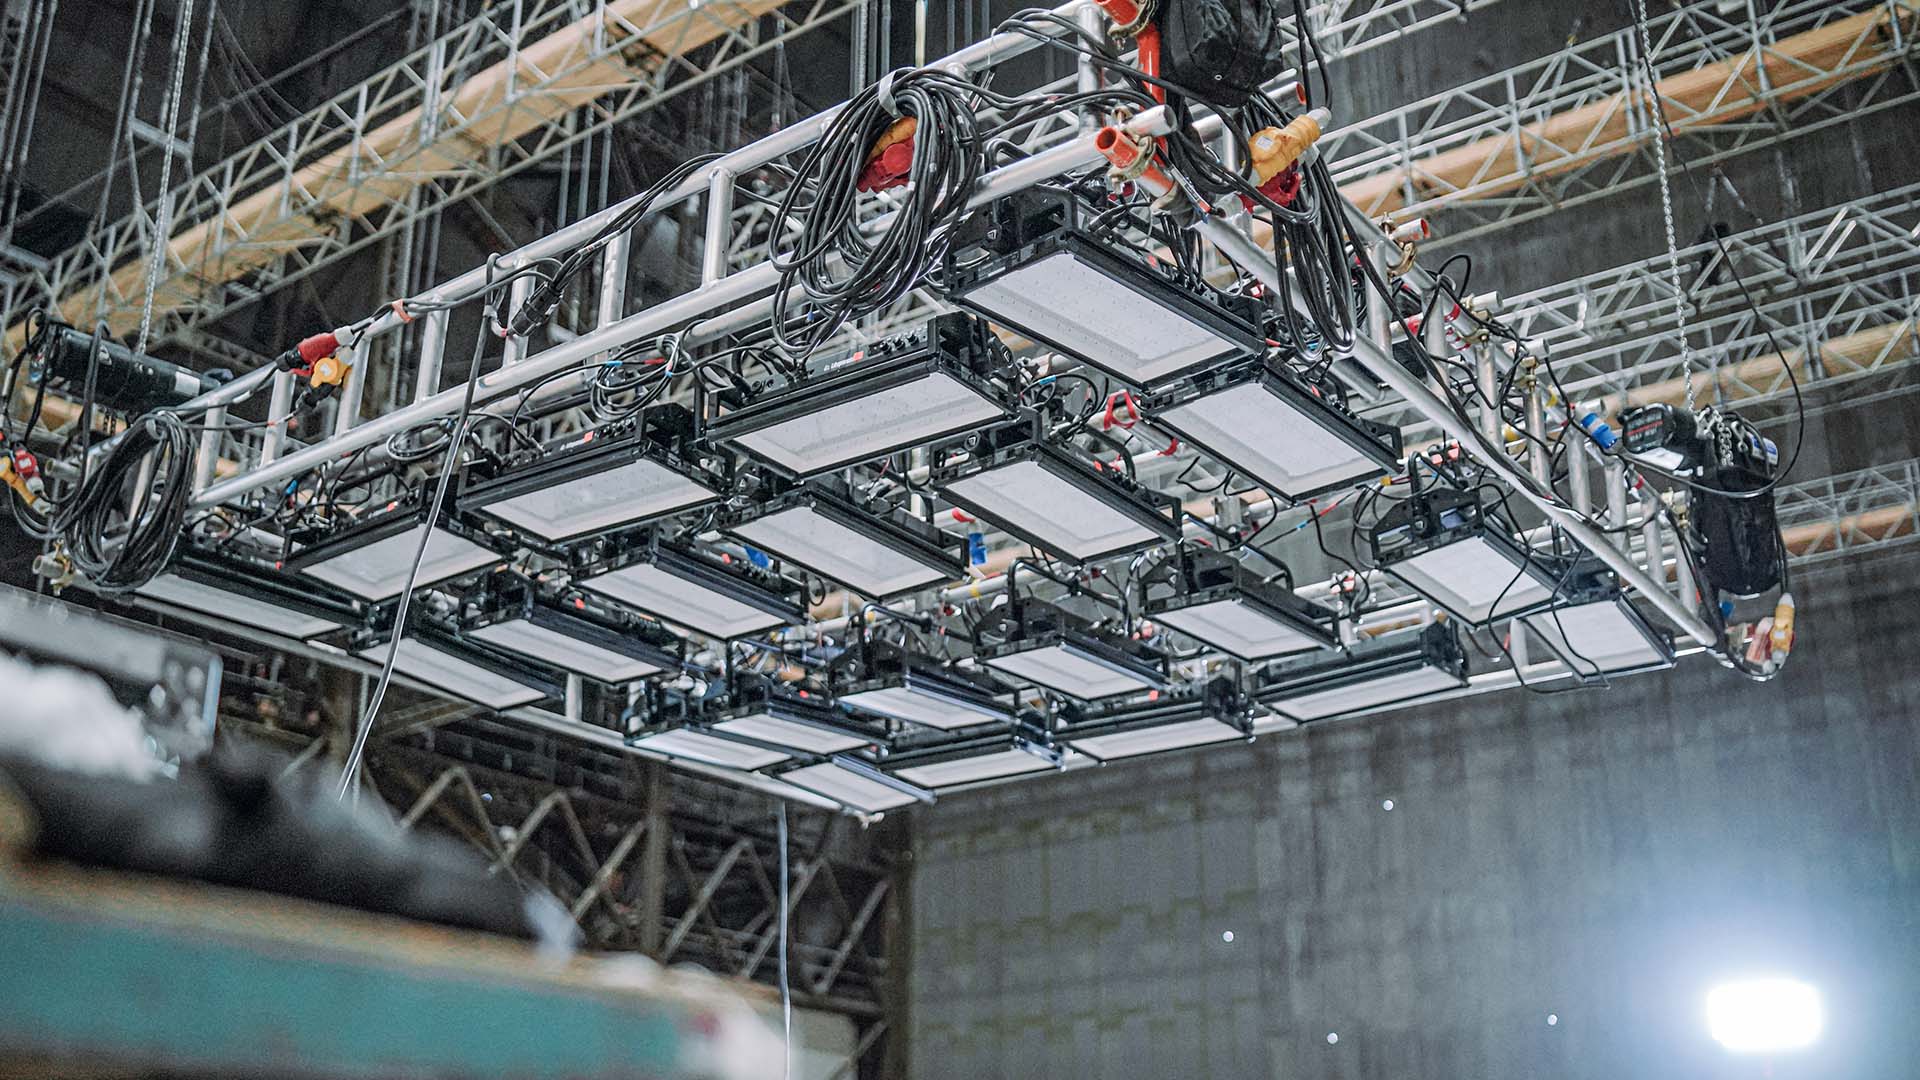 The new Gemini 2x1 Hard being put to work as a lighting array. Image: Litepanels.